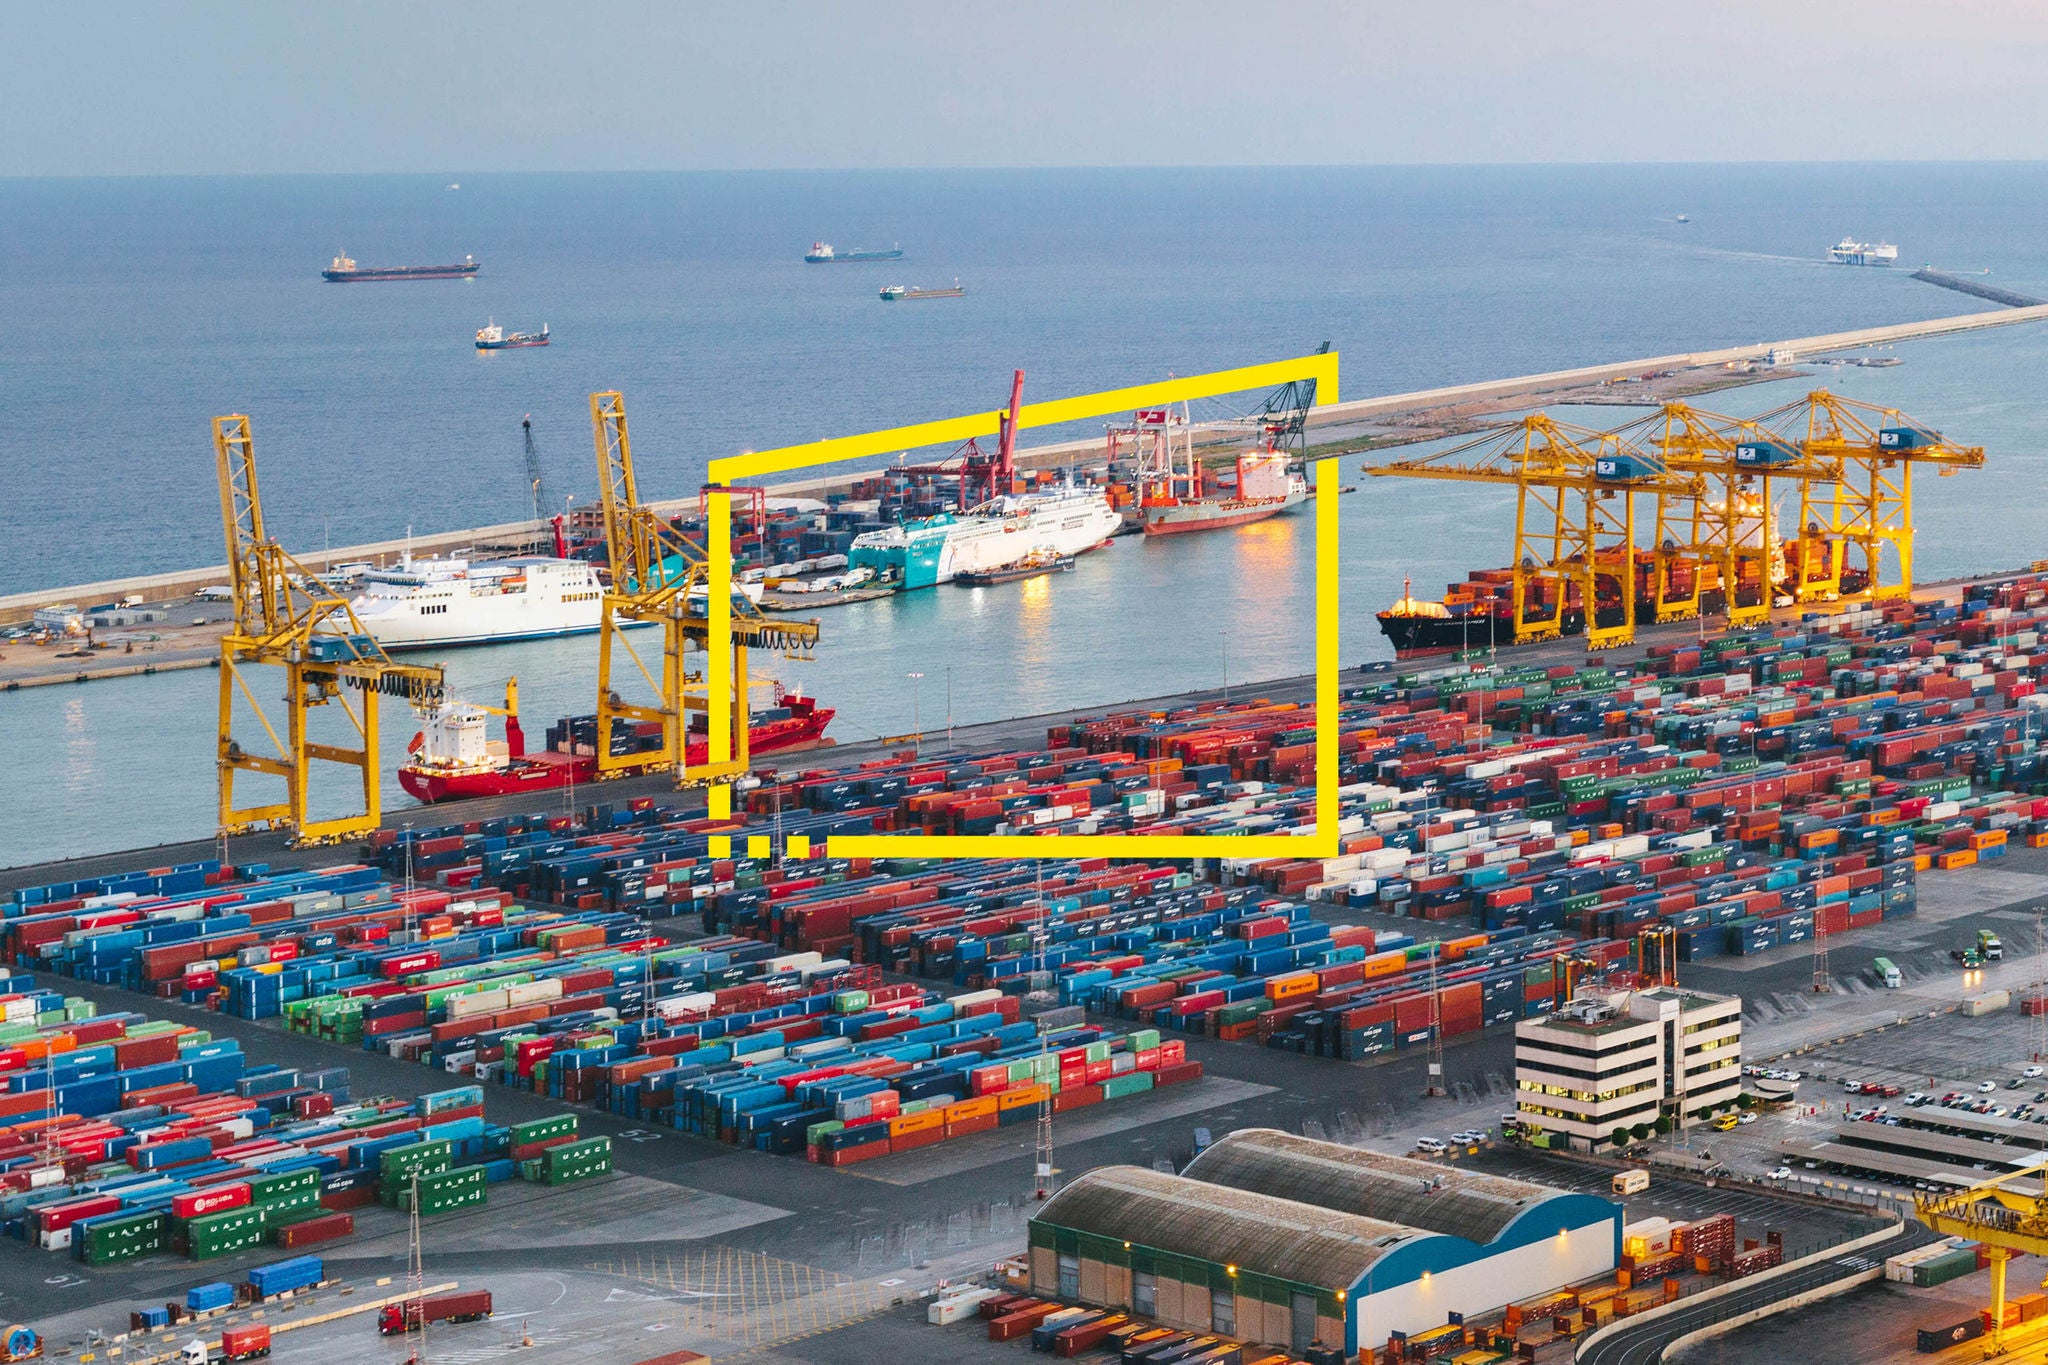 Commercial dock with containers and cranes static